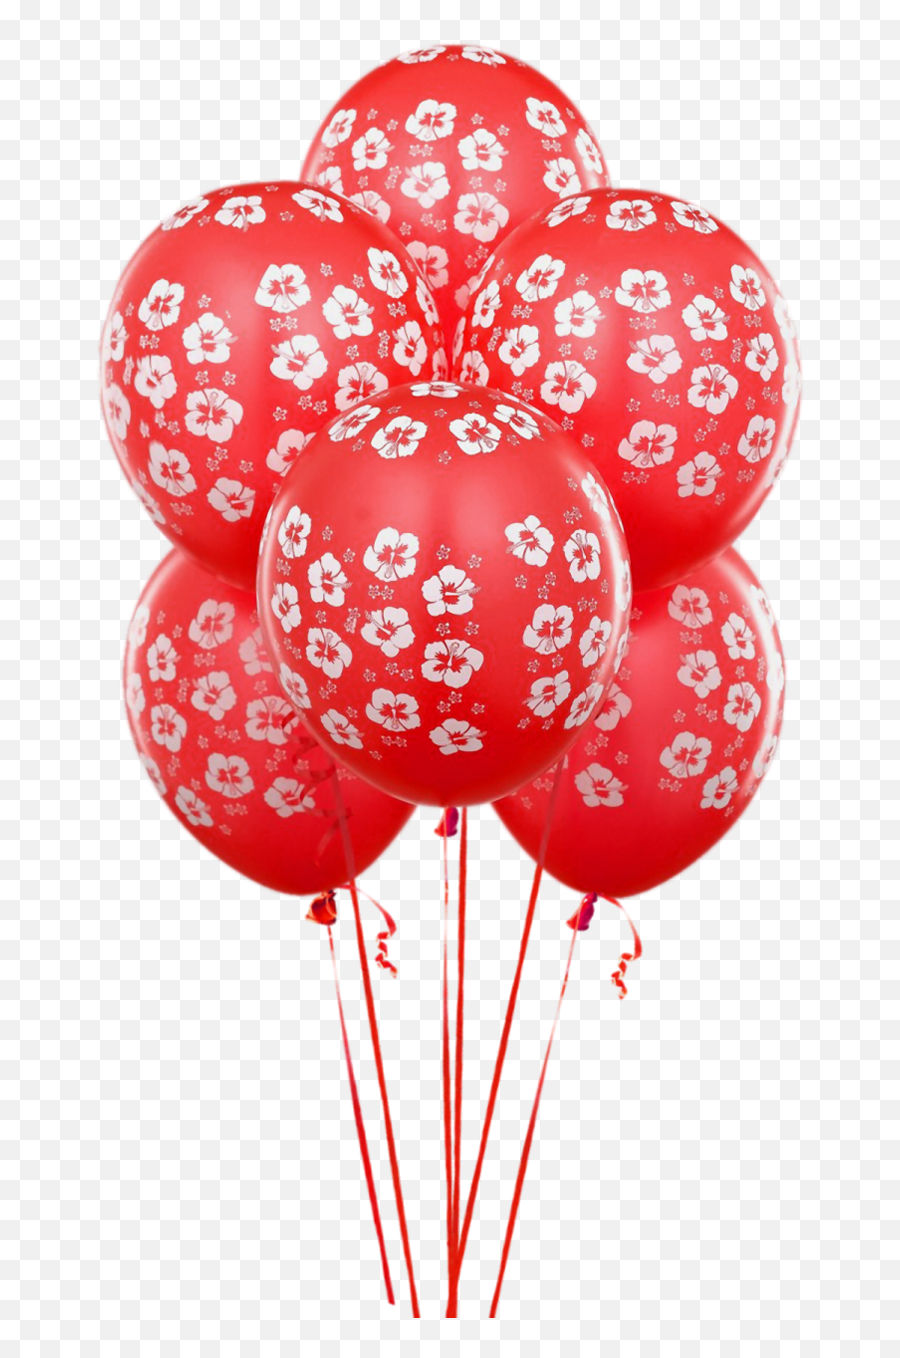 Download Free Png Transparent Red Balloons Png Images Emoji,White Balloons Png